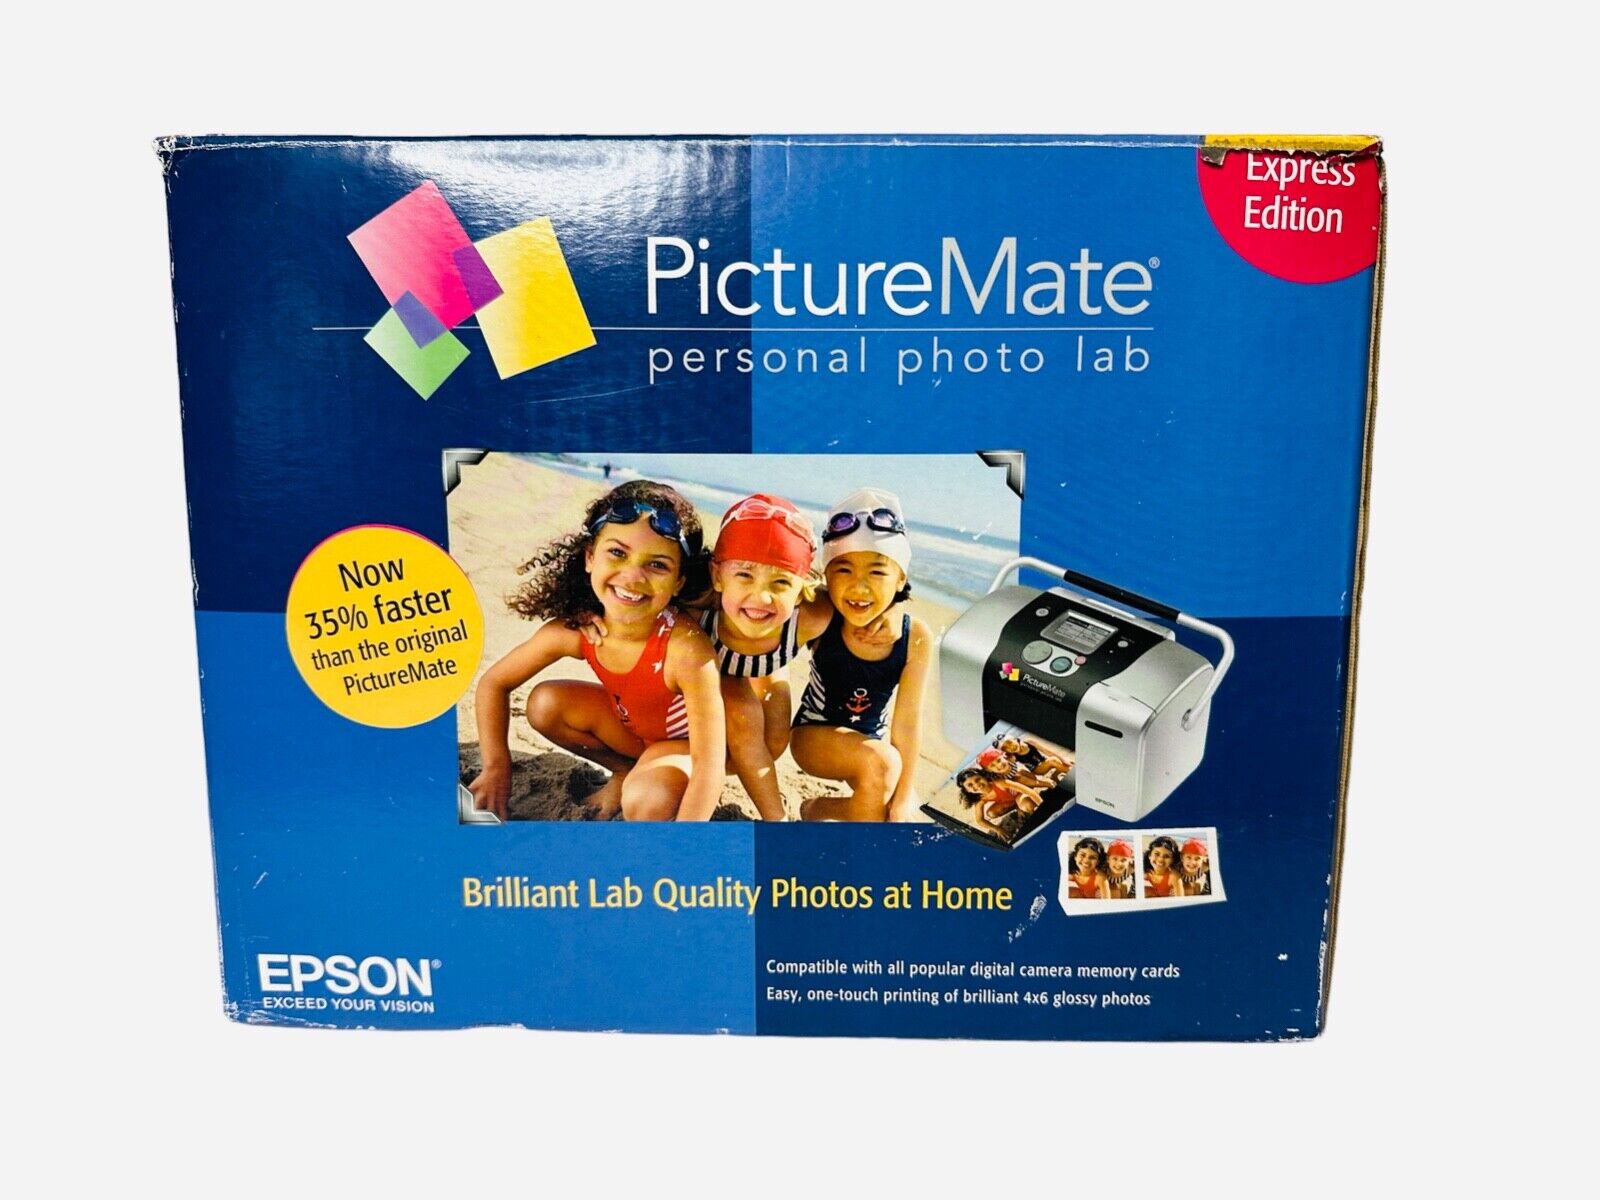 Epson Picture Mate Express Edition Personal Photo Lab 4x6 Photo Paper